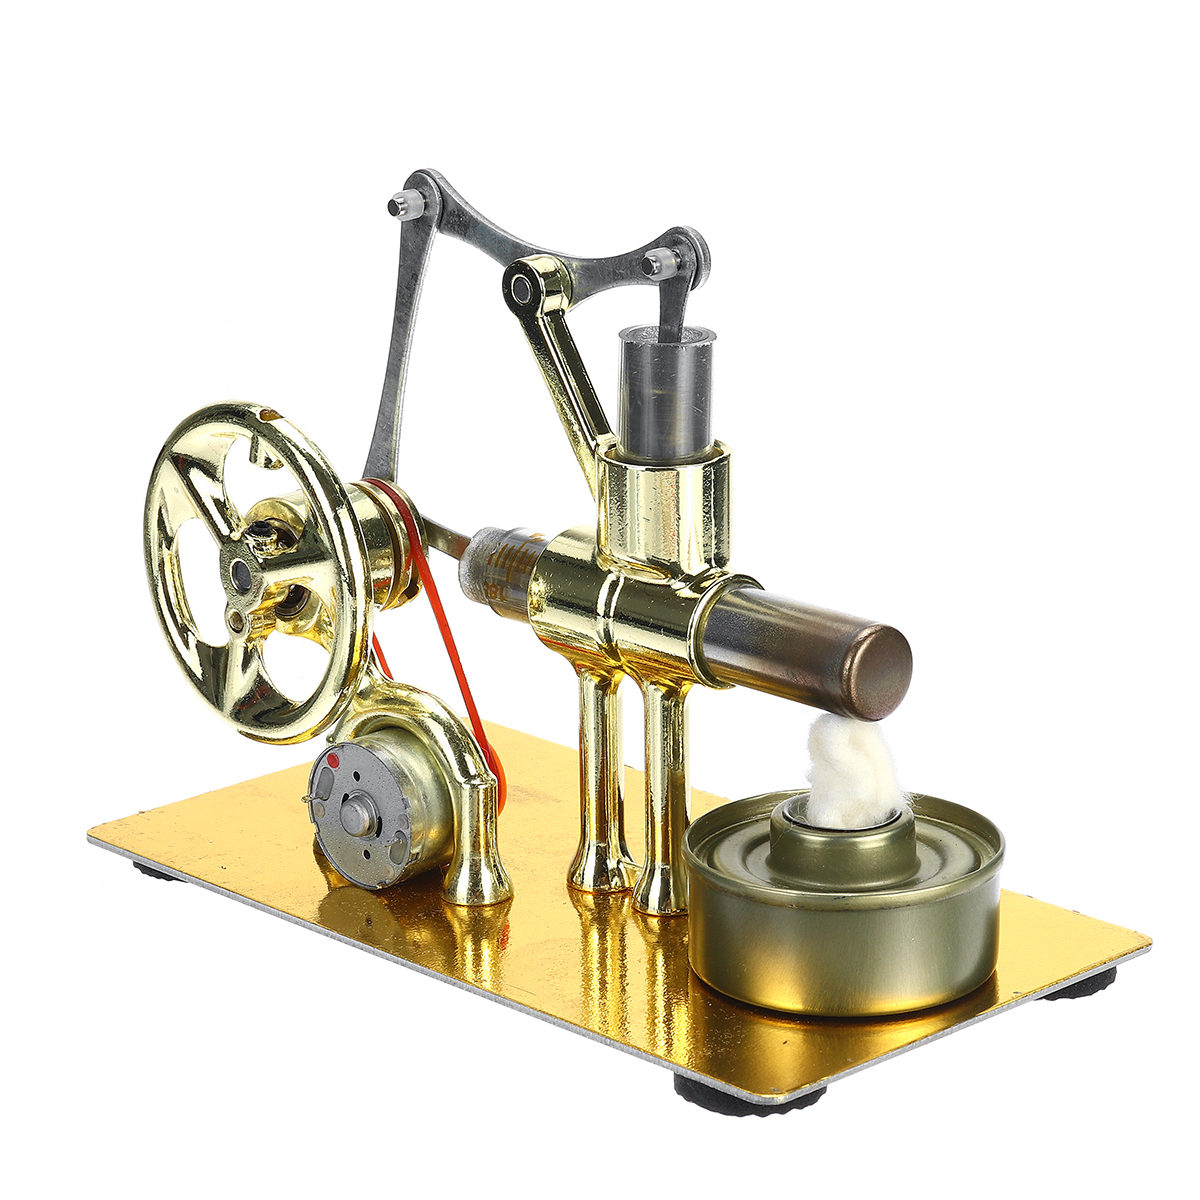 

Mini Hot Air Stirling Engine Model Power Generator Motor Physics Educational Science Toy